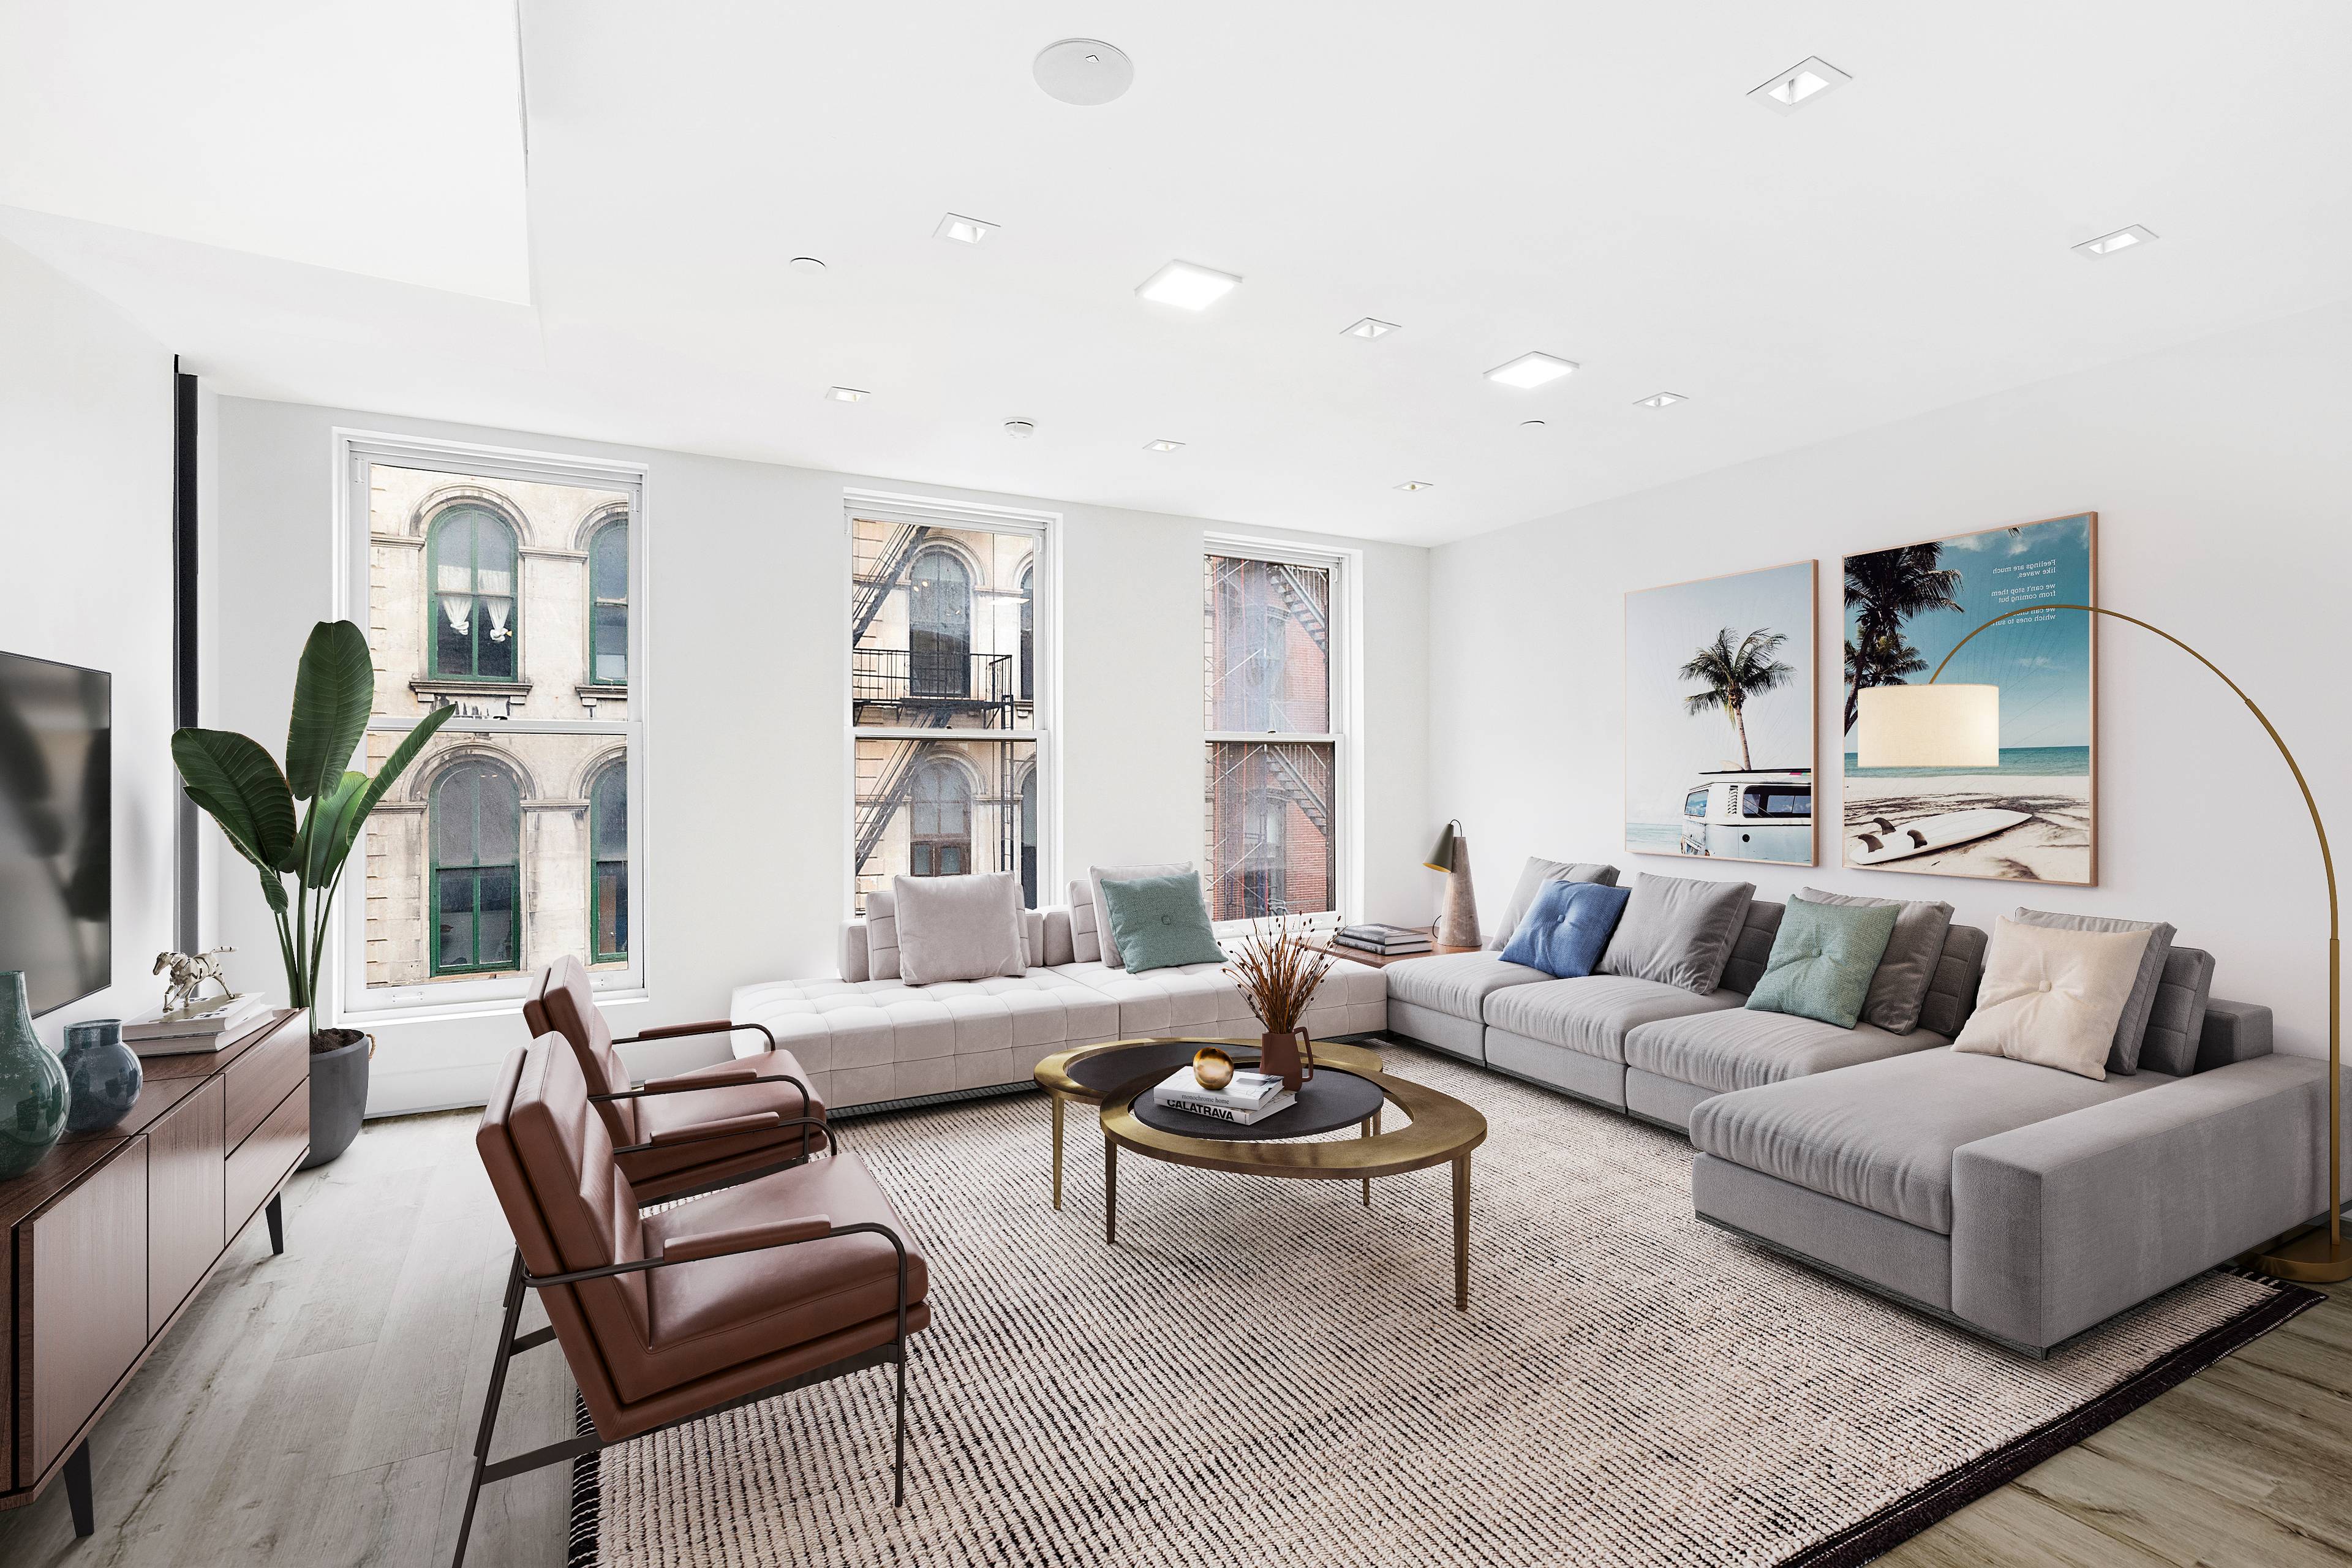 This brand new, full floor Tribeca loft offers 2 Bedrooms, 2 Bathrooms keyed elevator, and a private patio on Walker Street.